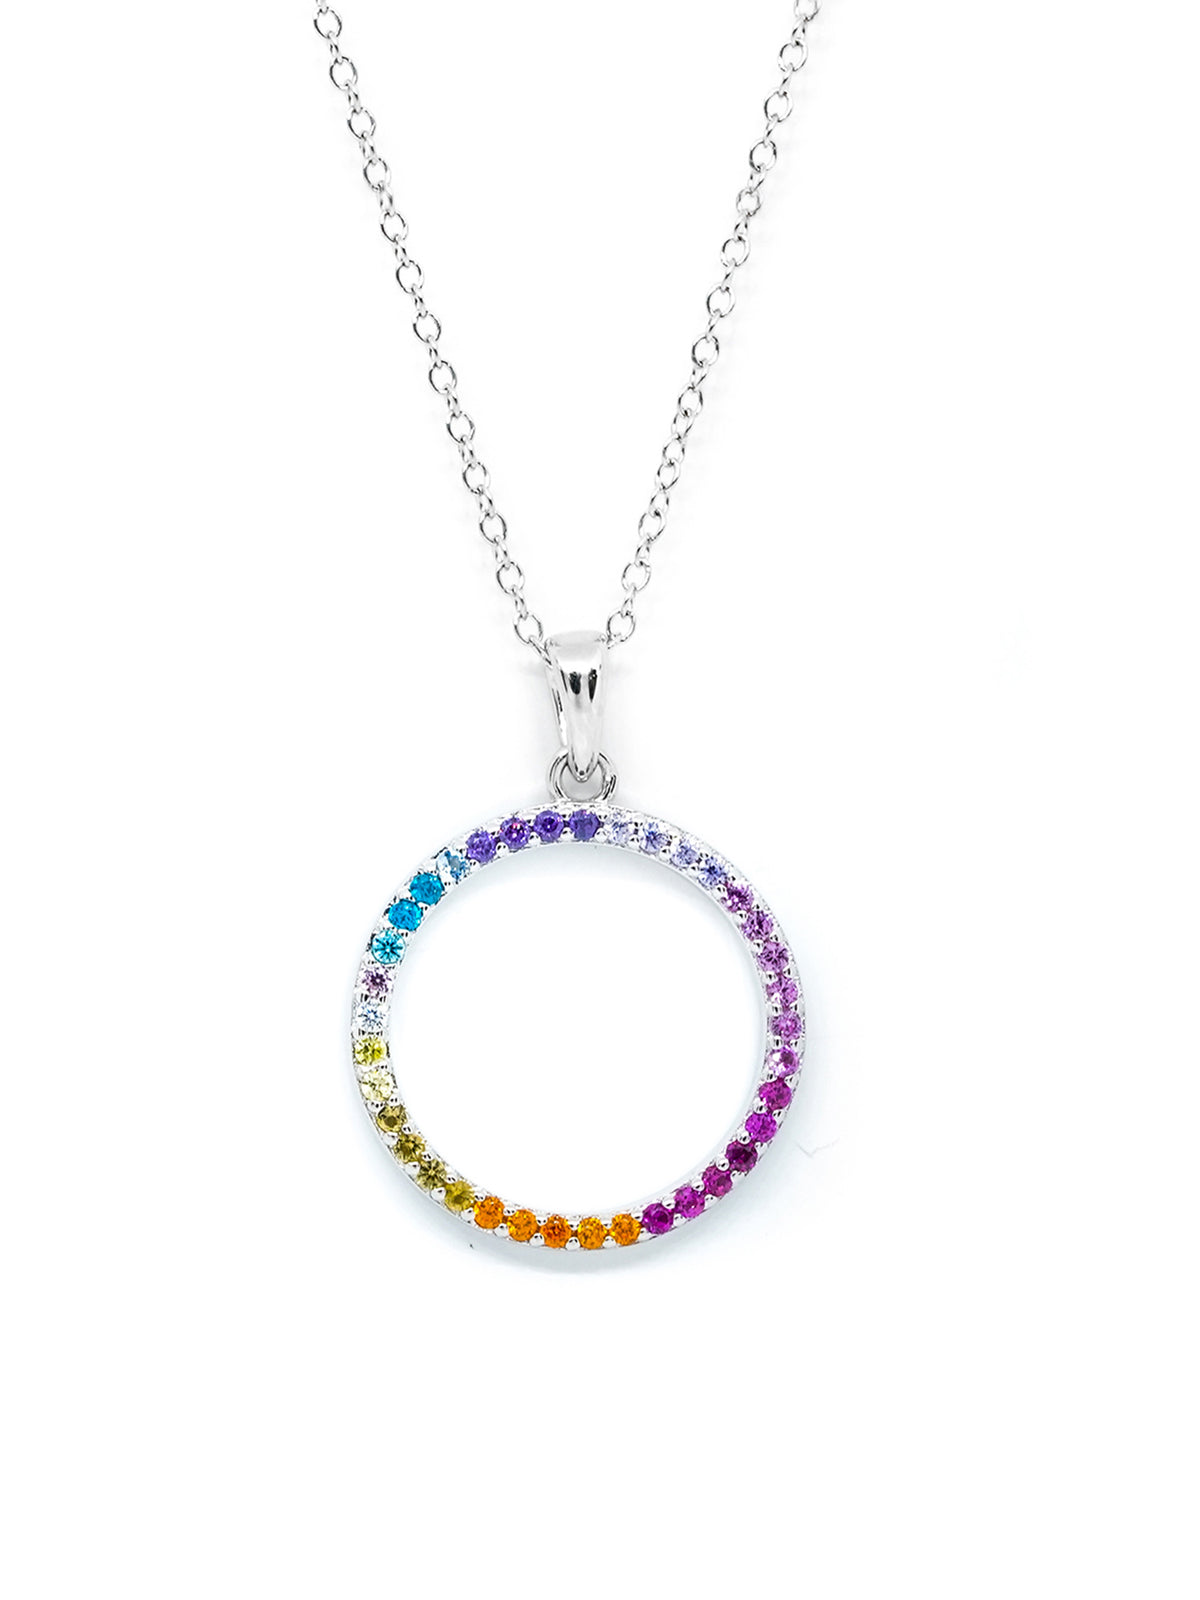 CIRCLE OF LIFE PENDANT WITH CHAIN